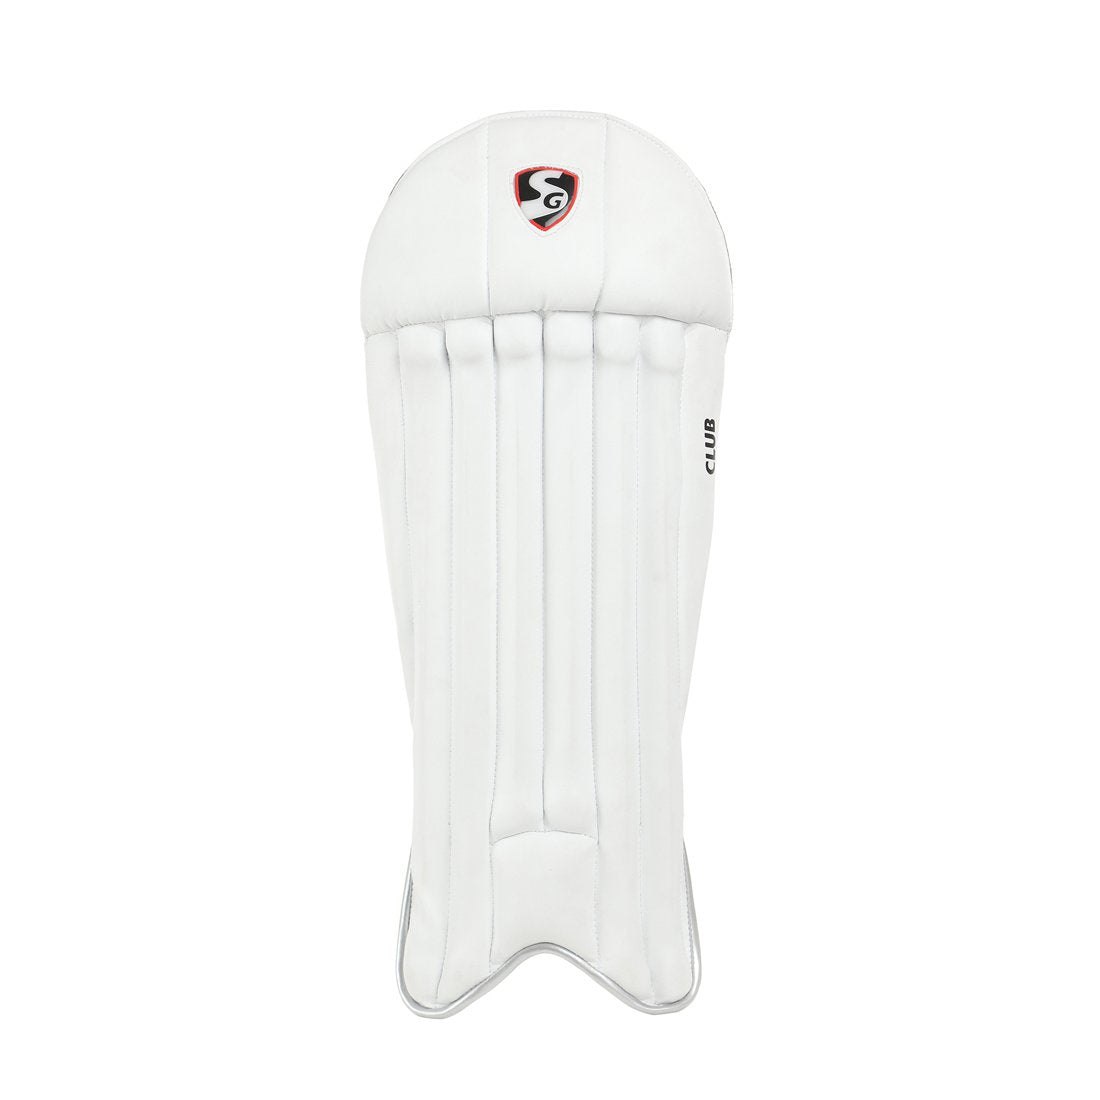 SG Club Junior / Youth Cricket Wicket Keeping Pads